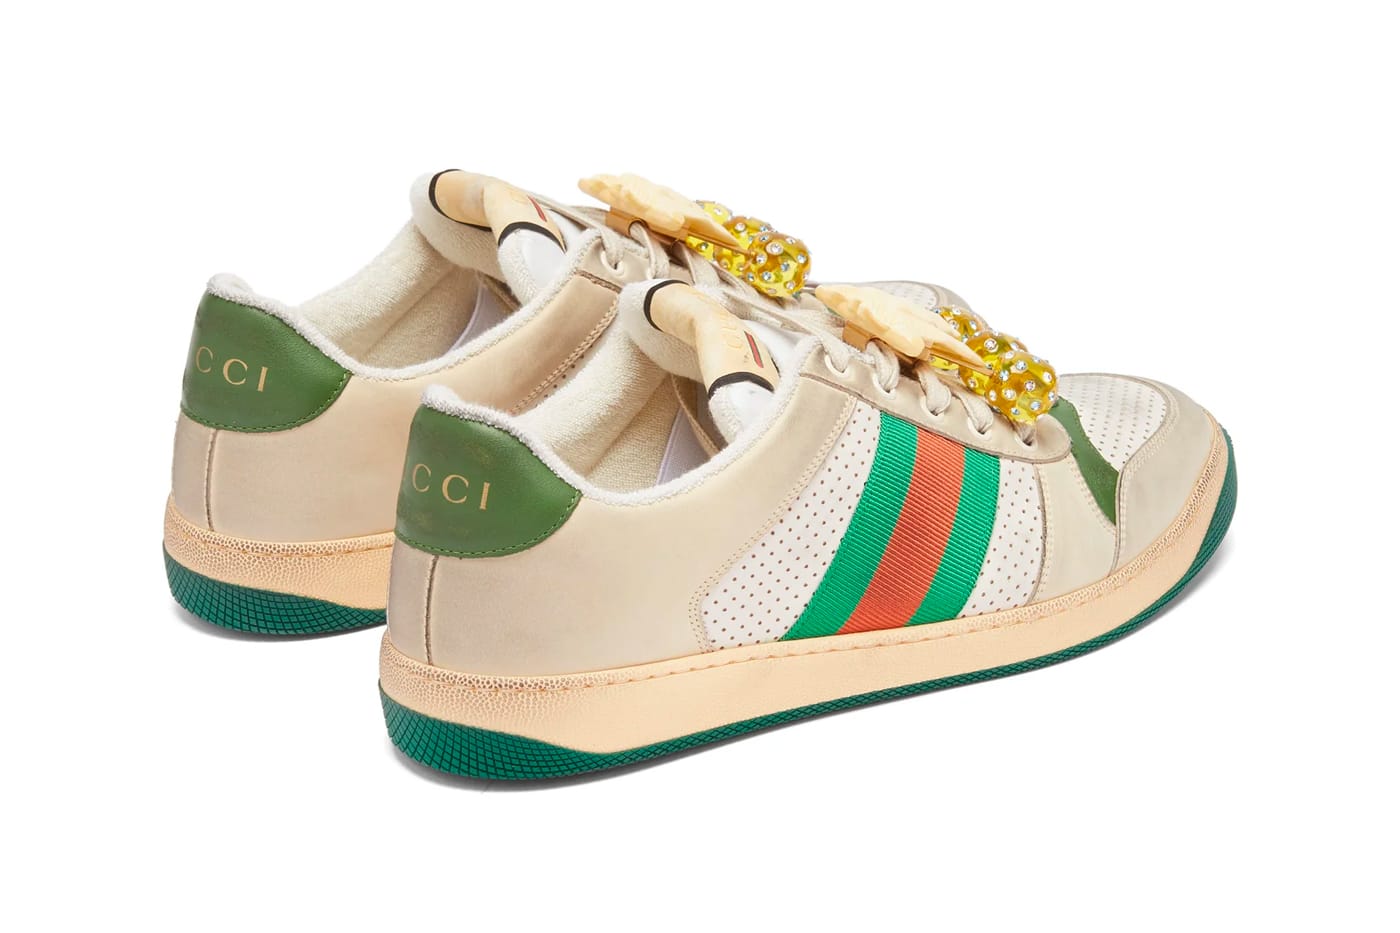 gucci embellished trainers